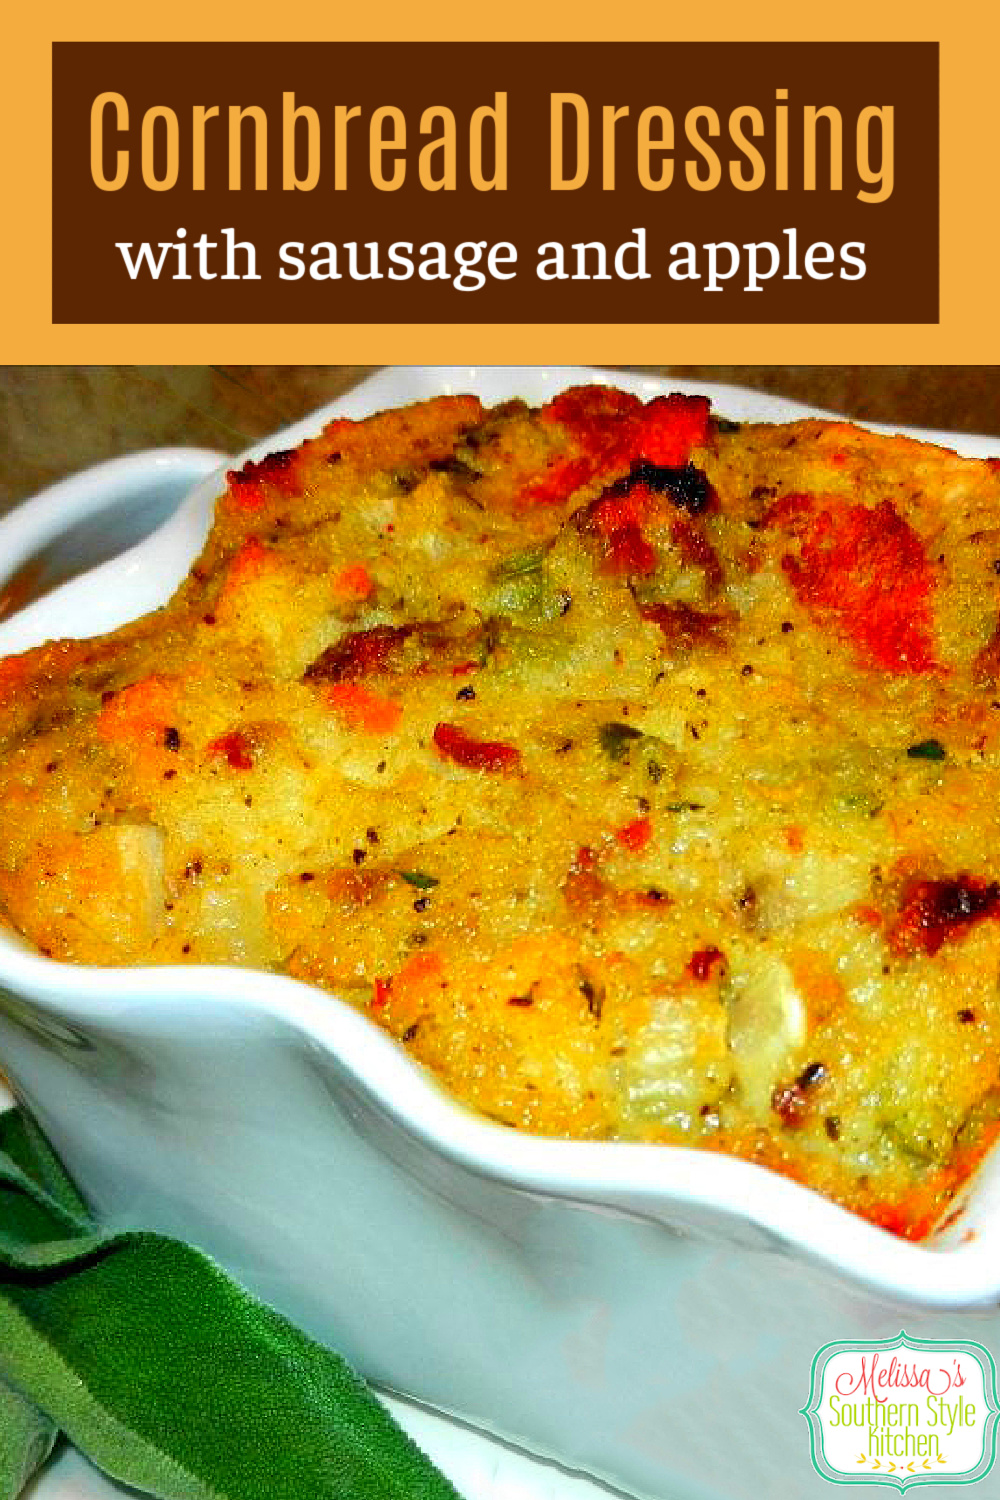 This flavorful Cornbread Dressing with Sausage and Apples and seasoned with fresh sage is a guaranteed win for your holiday side dish menu #cornbreaddressing #southerncornbread #dressing #thanksgivingrecipes #sausagedressing #dressingsausageapples #sidedishrecipes #holidaysidedish #holidaysidesdishrecipes